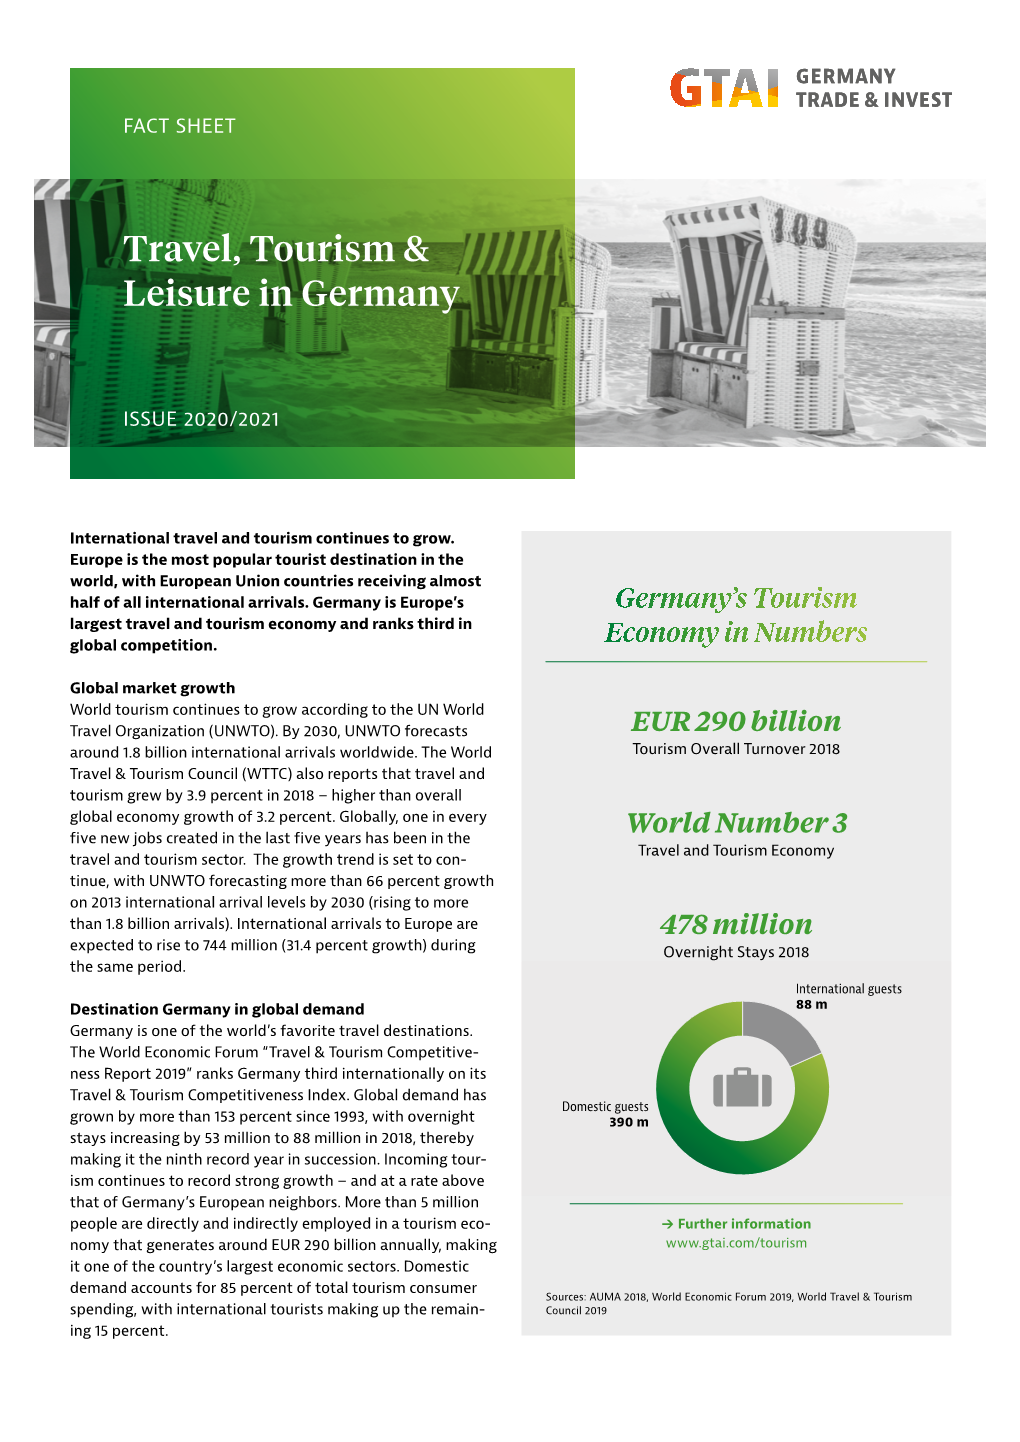 Travel, Tourism & Leisure in Germany